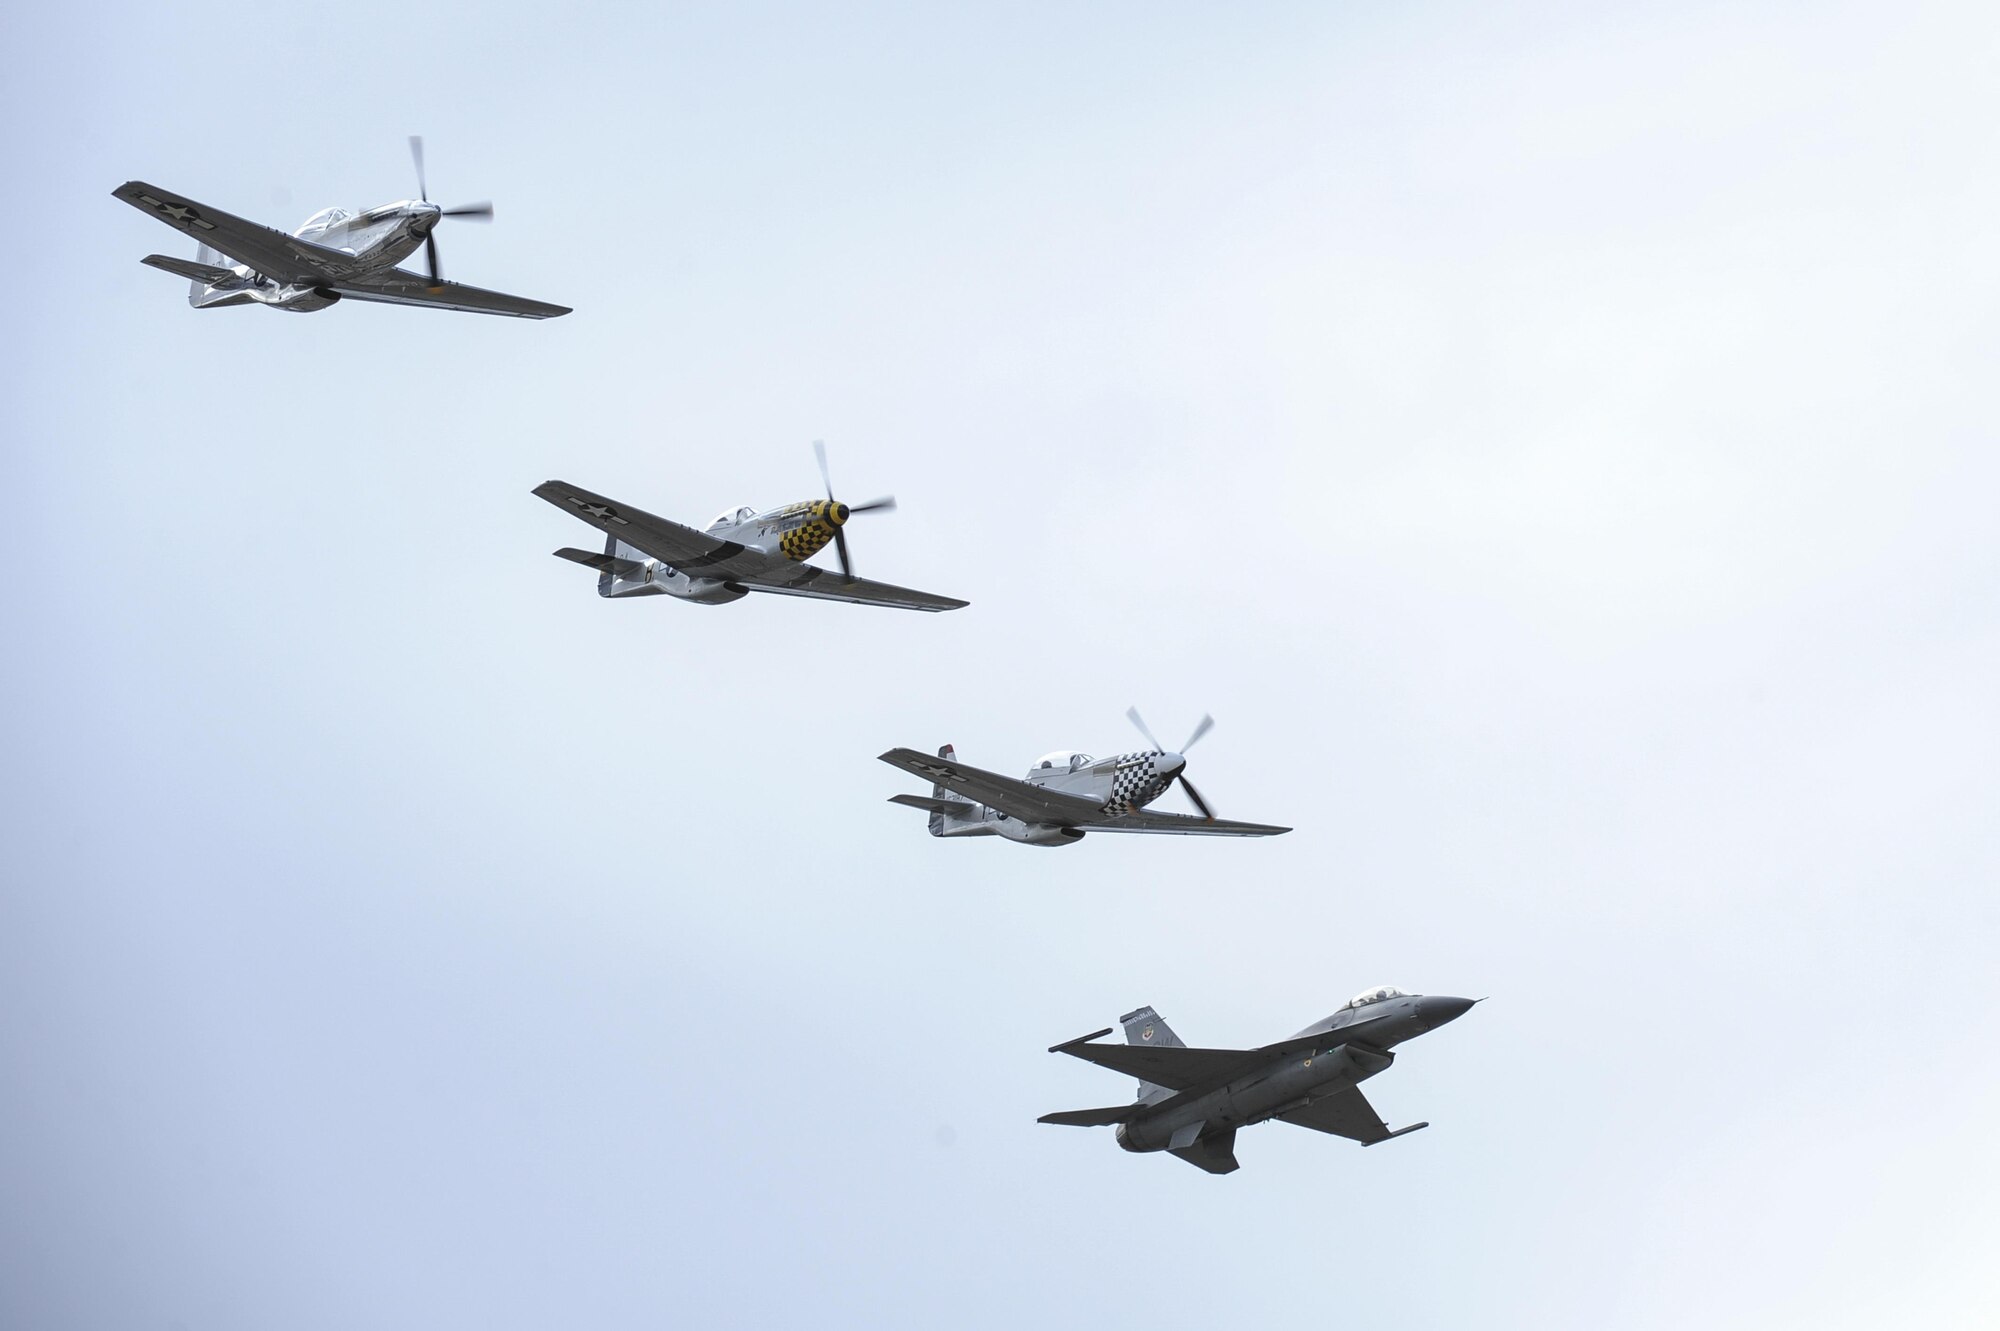 A U.S. Air Force F-16C Fighting Falcon, two P-51 Mustangs and a TF-51 Mustang fly in formation during the 2017 Heritage Flight Training and Certification Course at Davis-Monthan Air Force Base, Ariz., Feb. 12, 2017. The historic aircraft included the P-51 and T-51 Mustang, the P-40 Warhawk, the P-38 Lightning, the P-47 Thunderbolt, the T-33 Shooting Star and the F-86 Sabre. (U.S. Air Force photo by Airman 1st Class Mya M. Crosby)